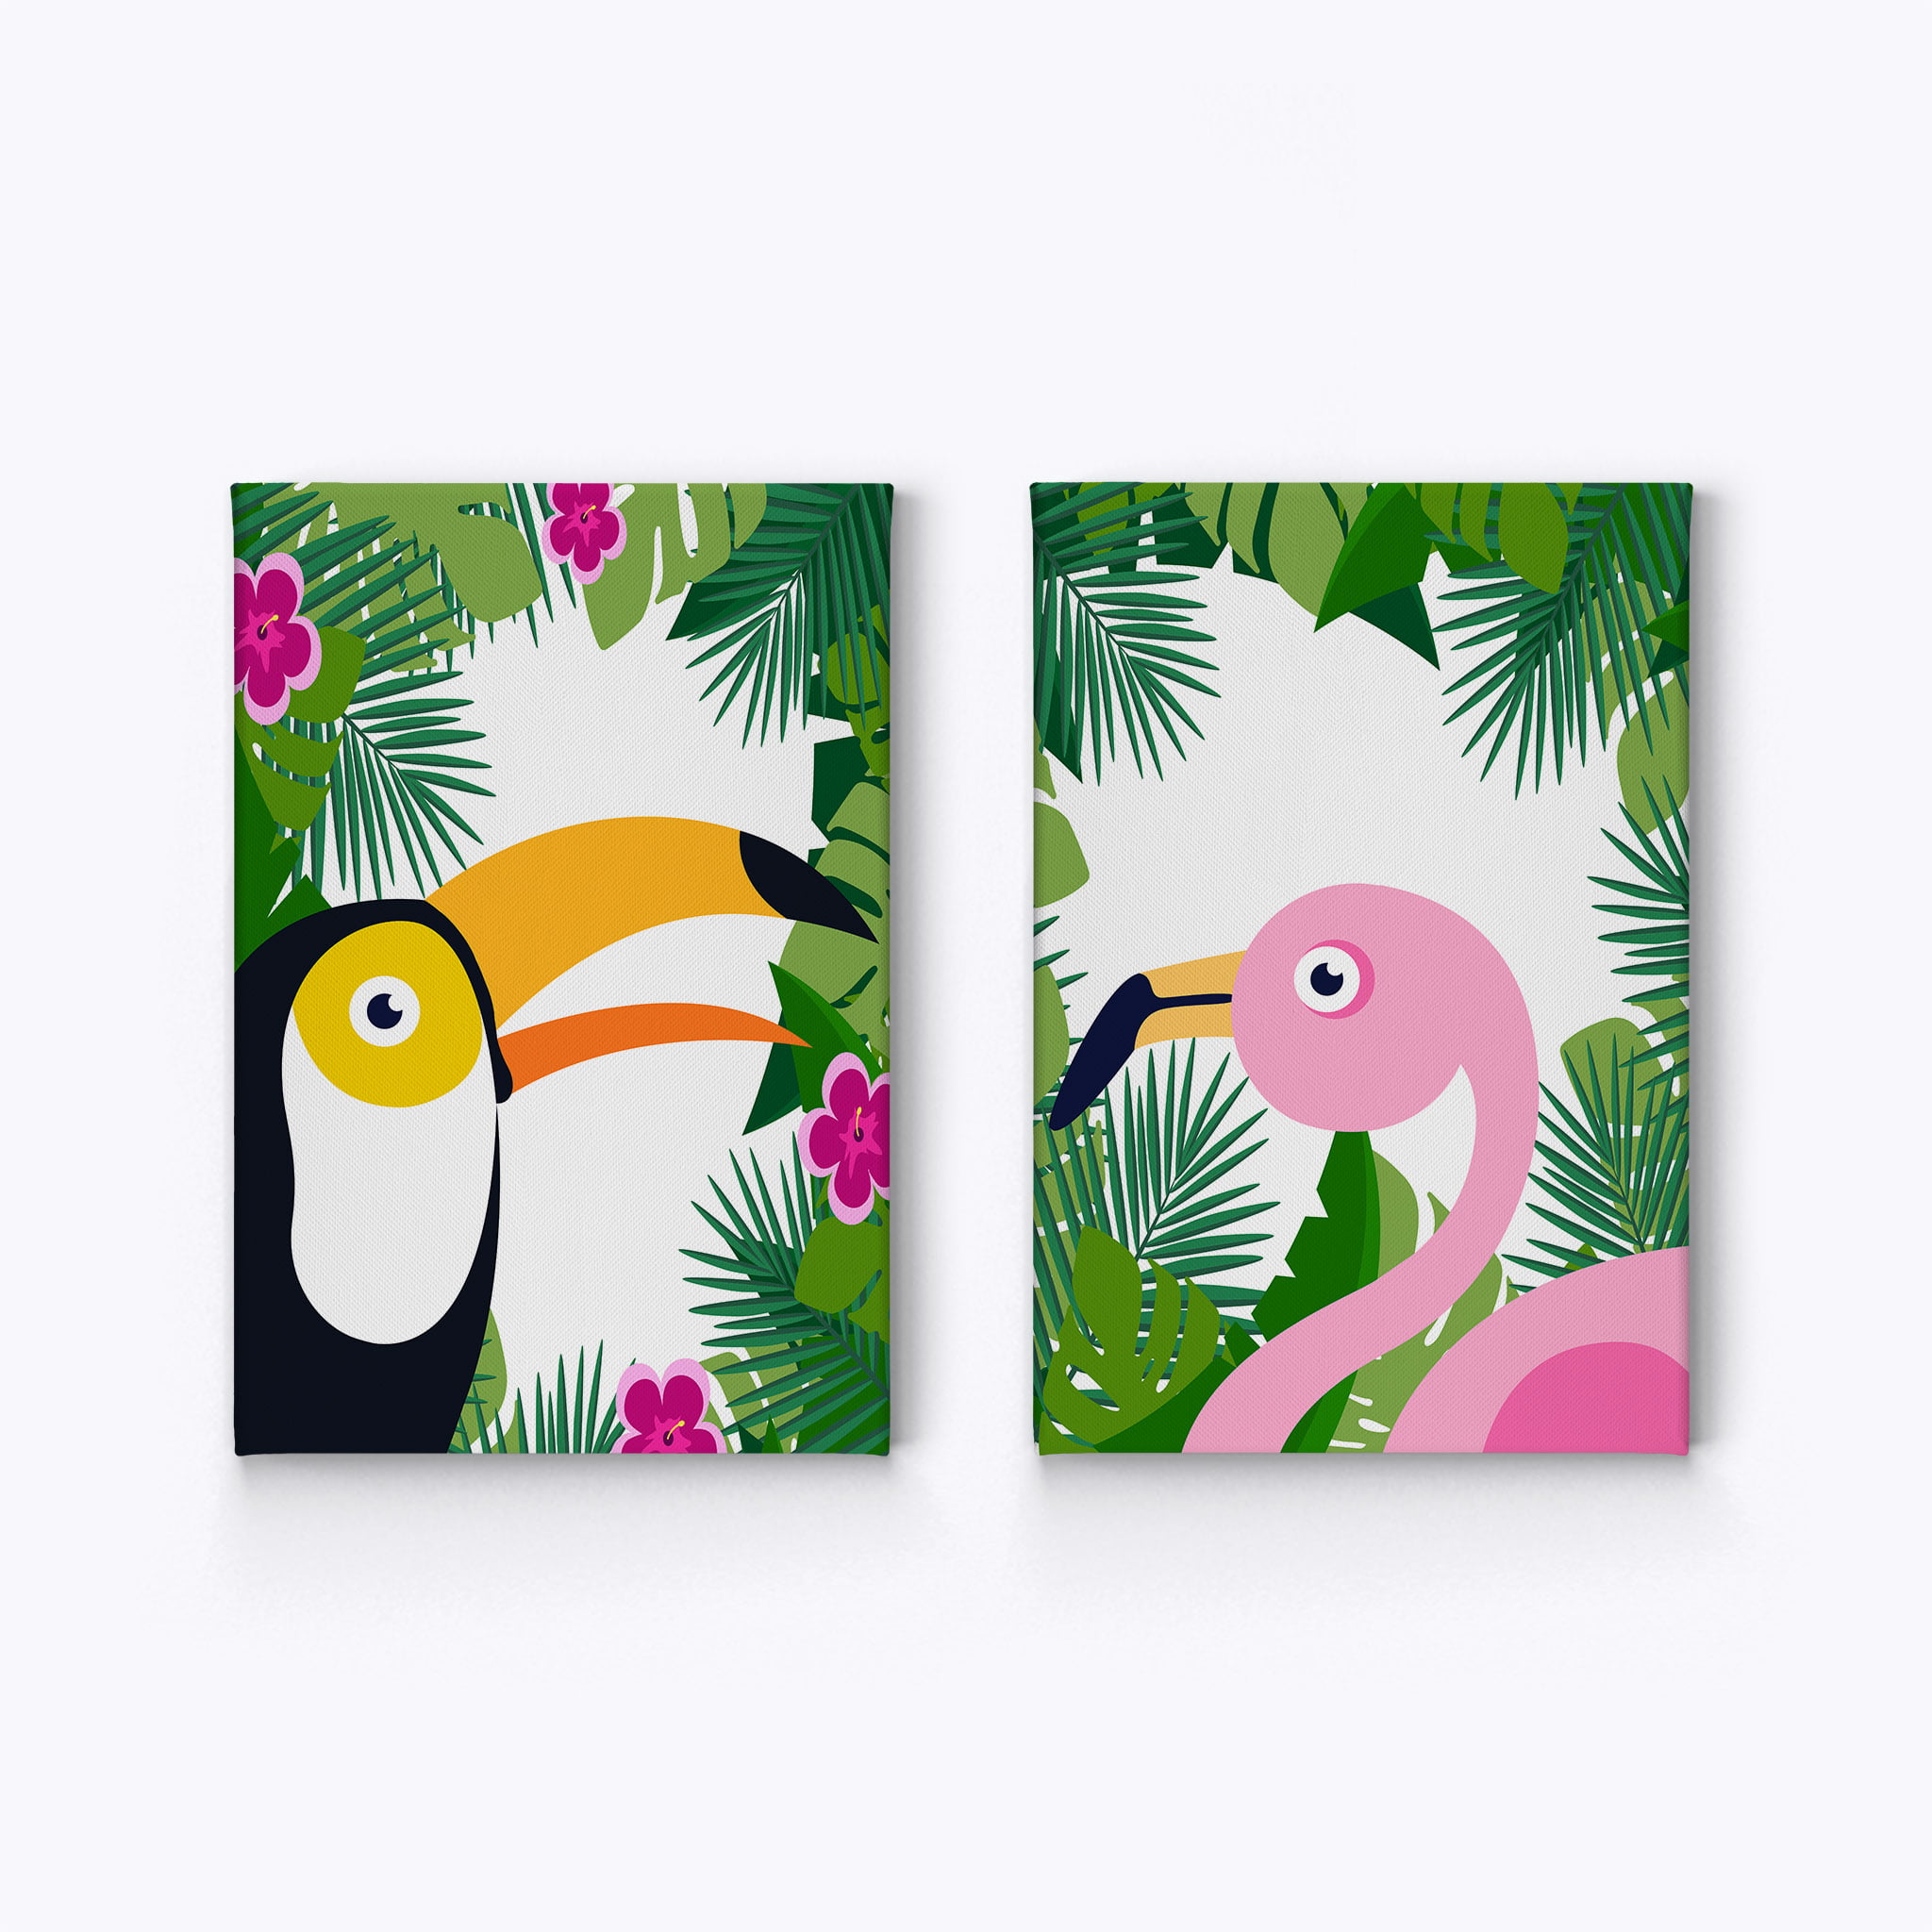 Beautifully hand-carved tropical themed wall hanging Ideal for a jungle or Tiki Room This 3 piece wall hanging features a toucan and fish